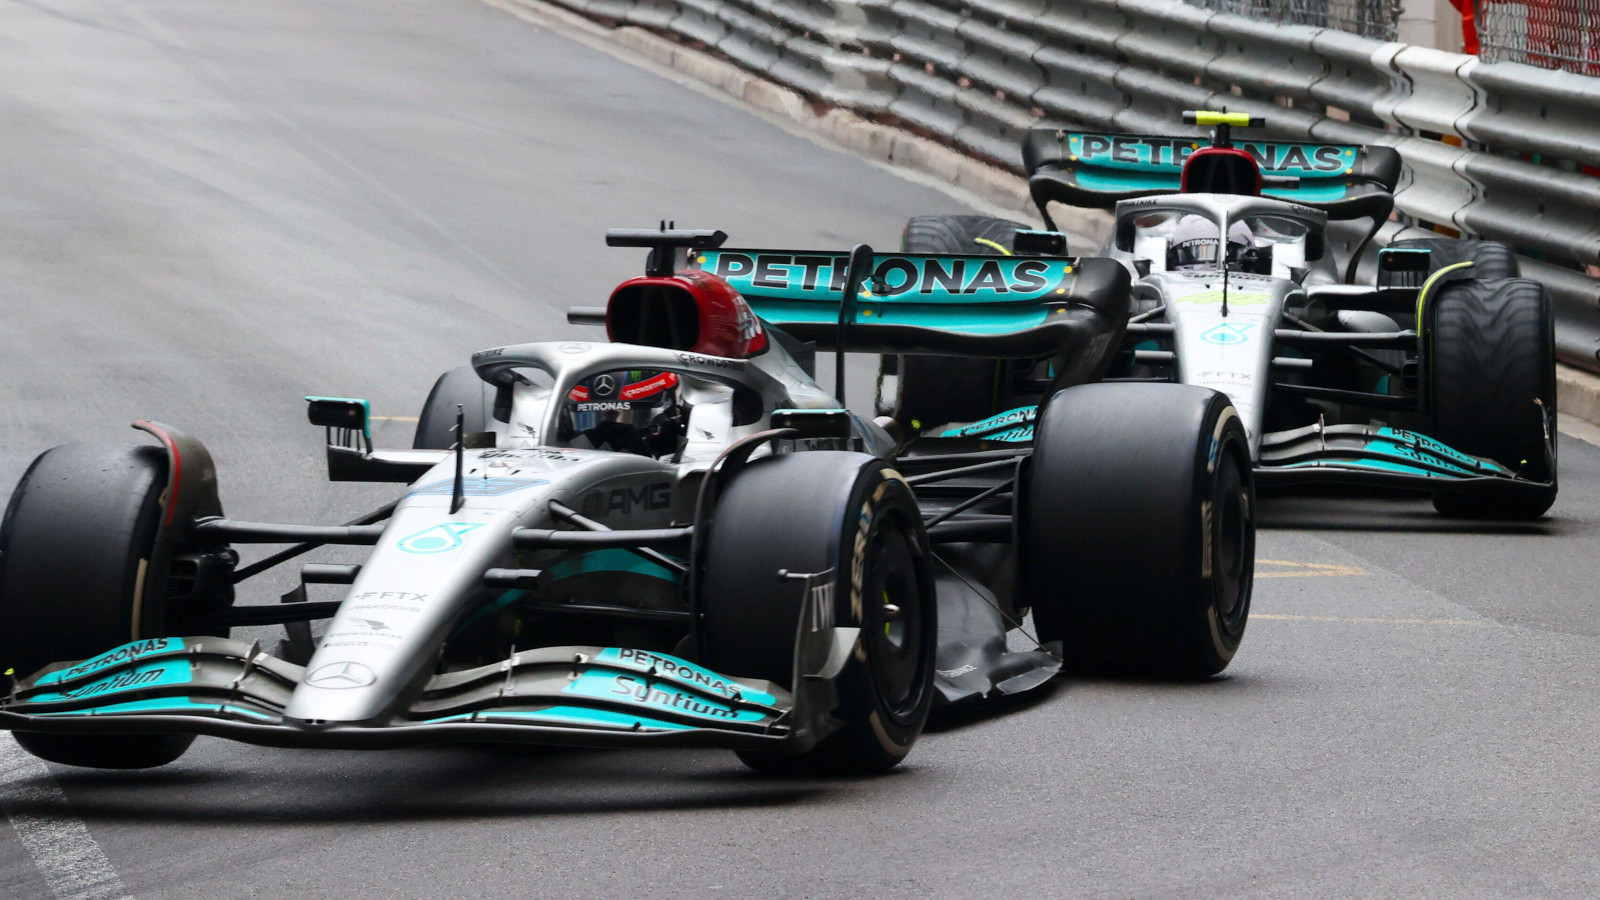 Lewis Hamilton, George Russell focused on Mercedes improvement, not each other